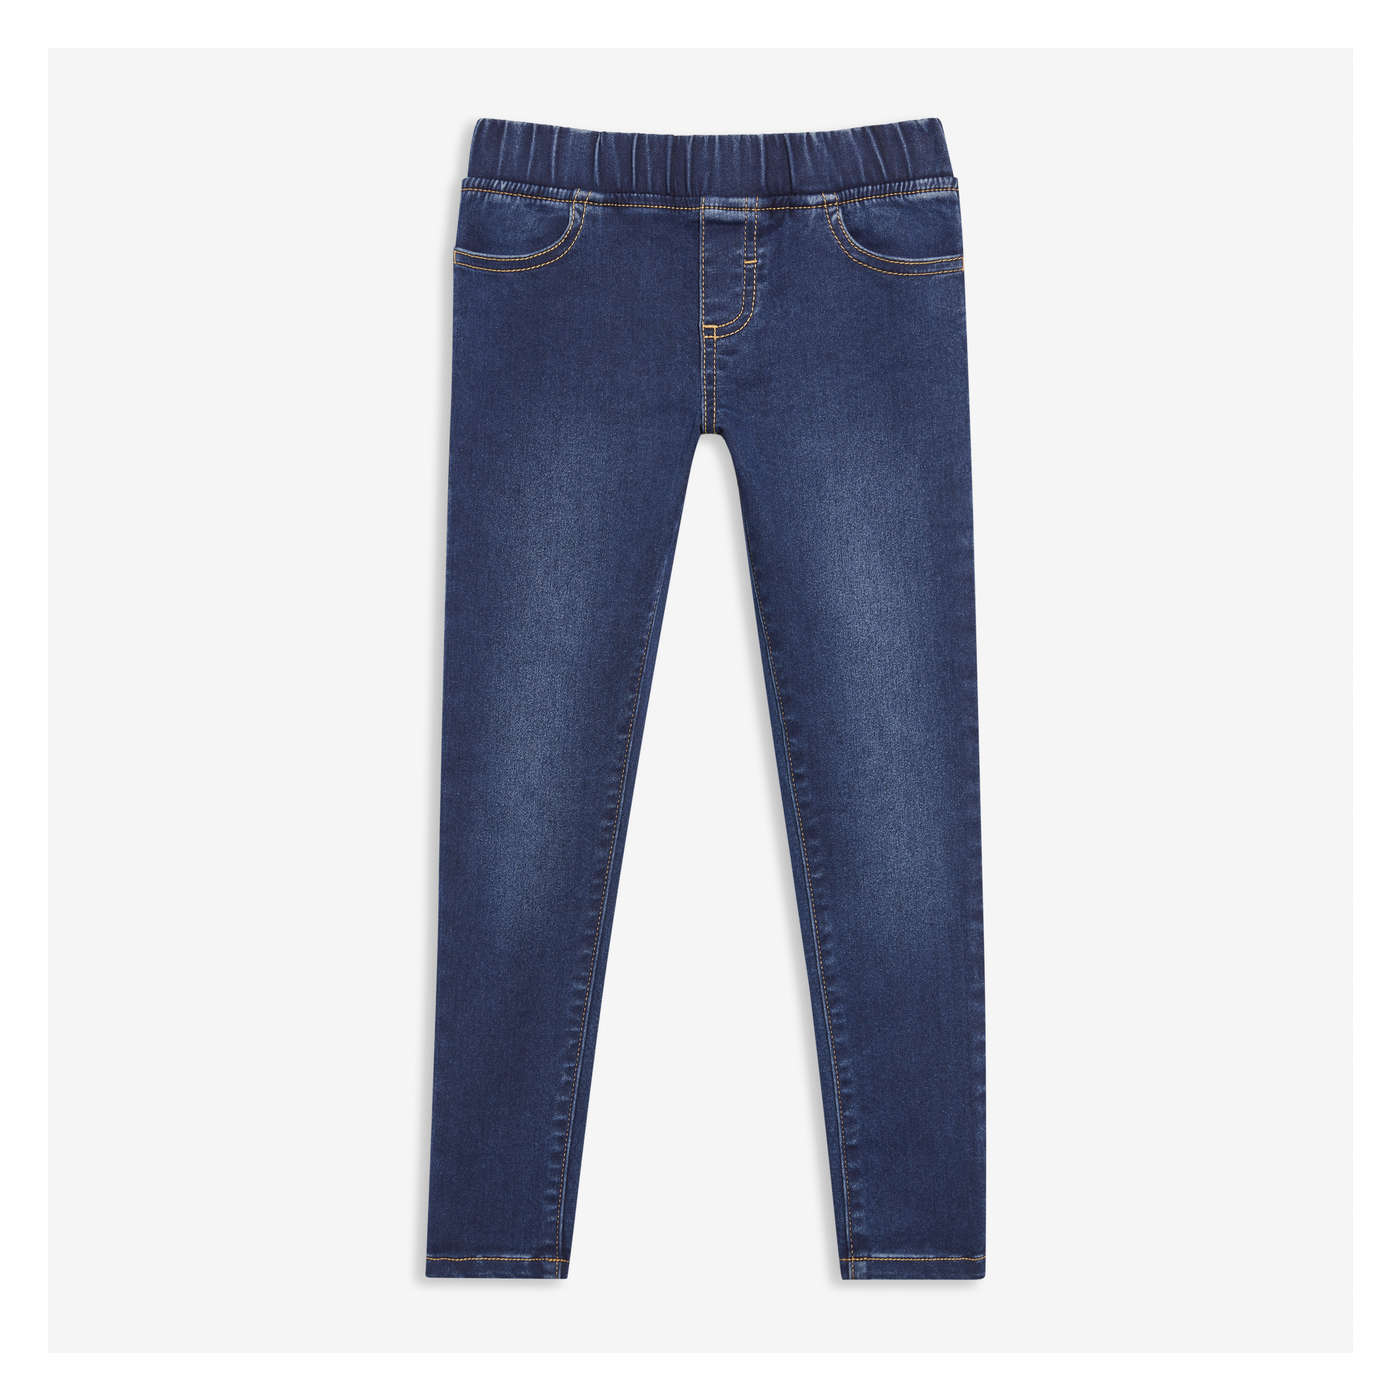 Stretchy blue jeggings 7-8y – Canopy Kids